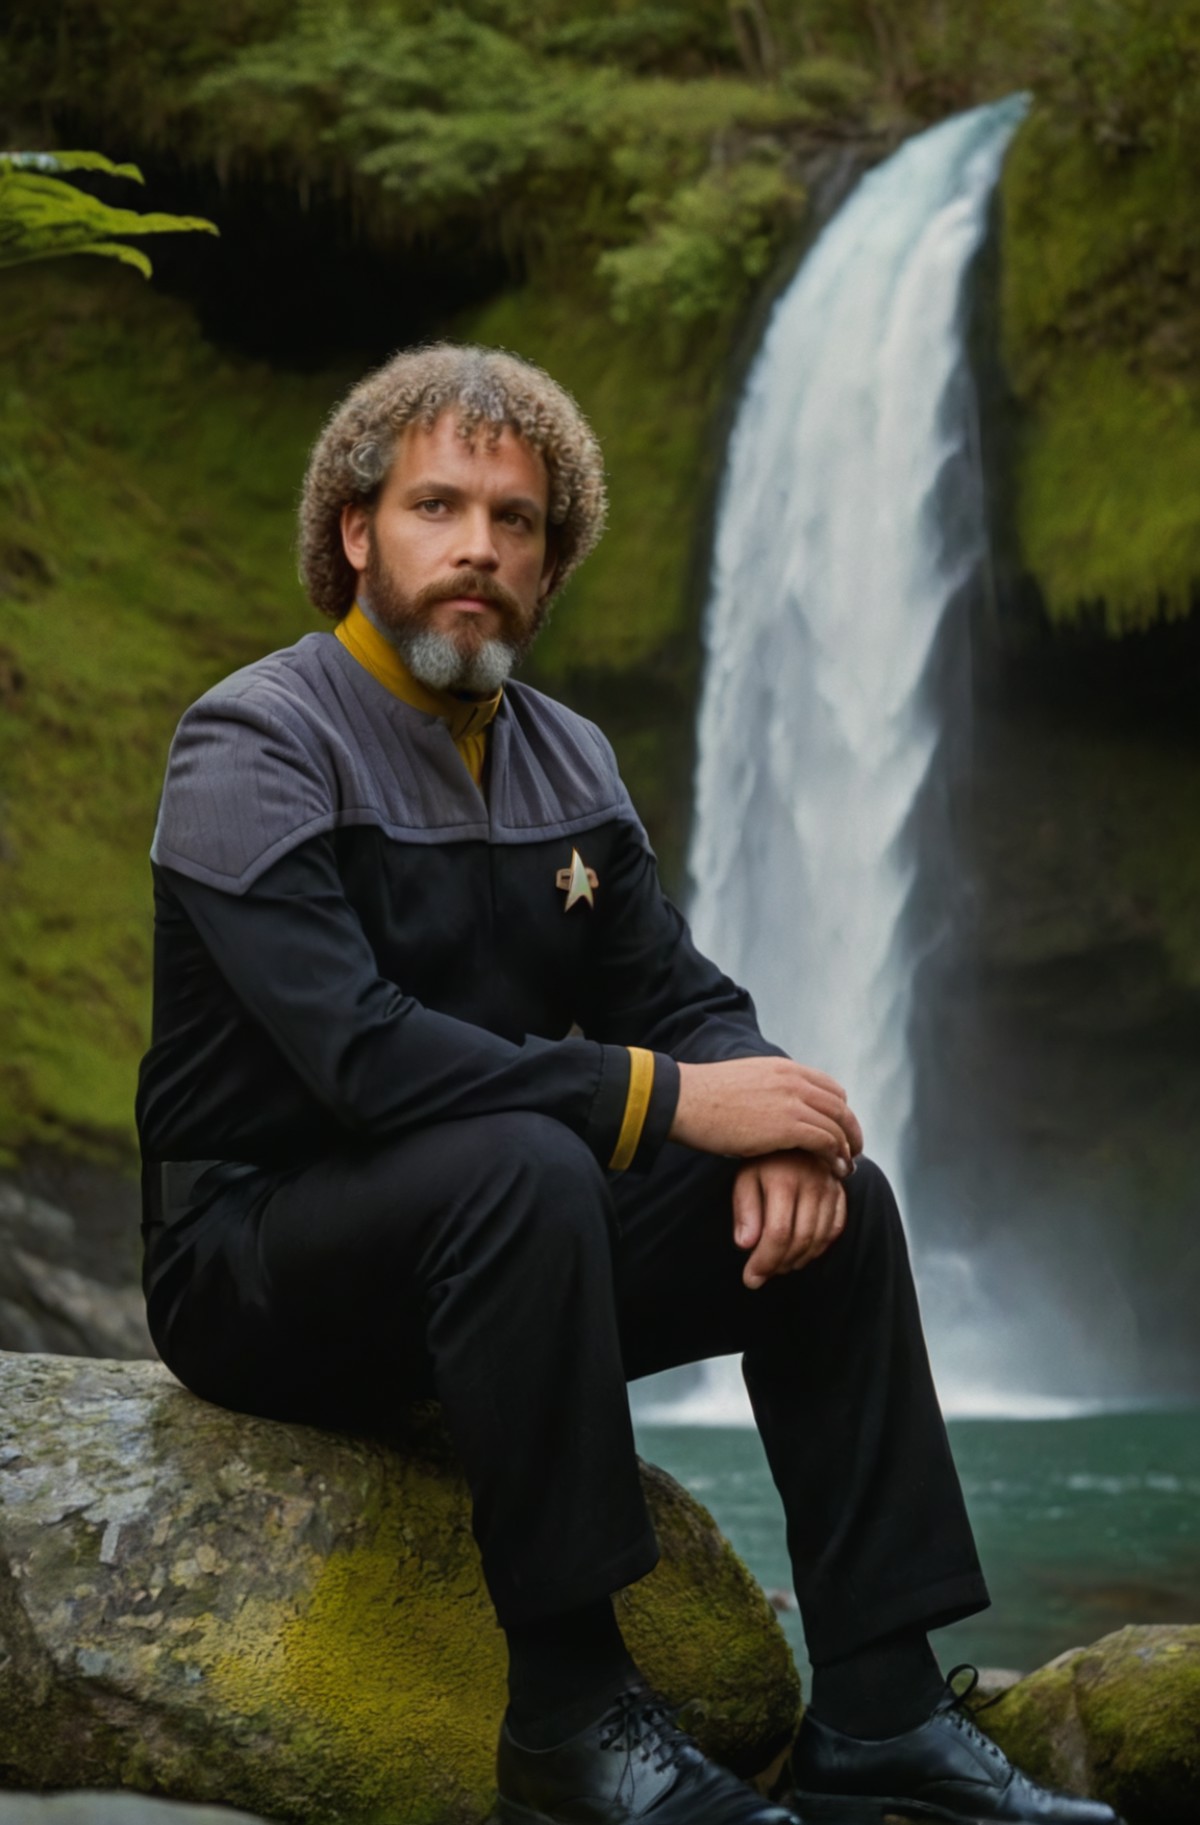 black ds9st uniform,grey shoulders,yellow collar,man with curly hair and beard sitting on a rock near a waterfall,professi...